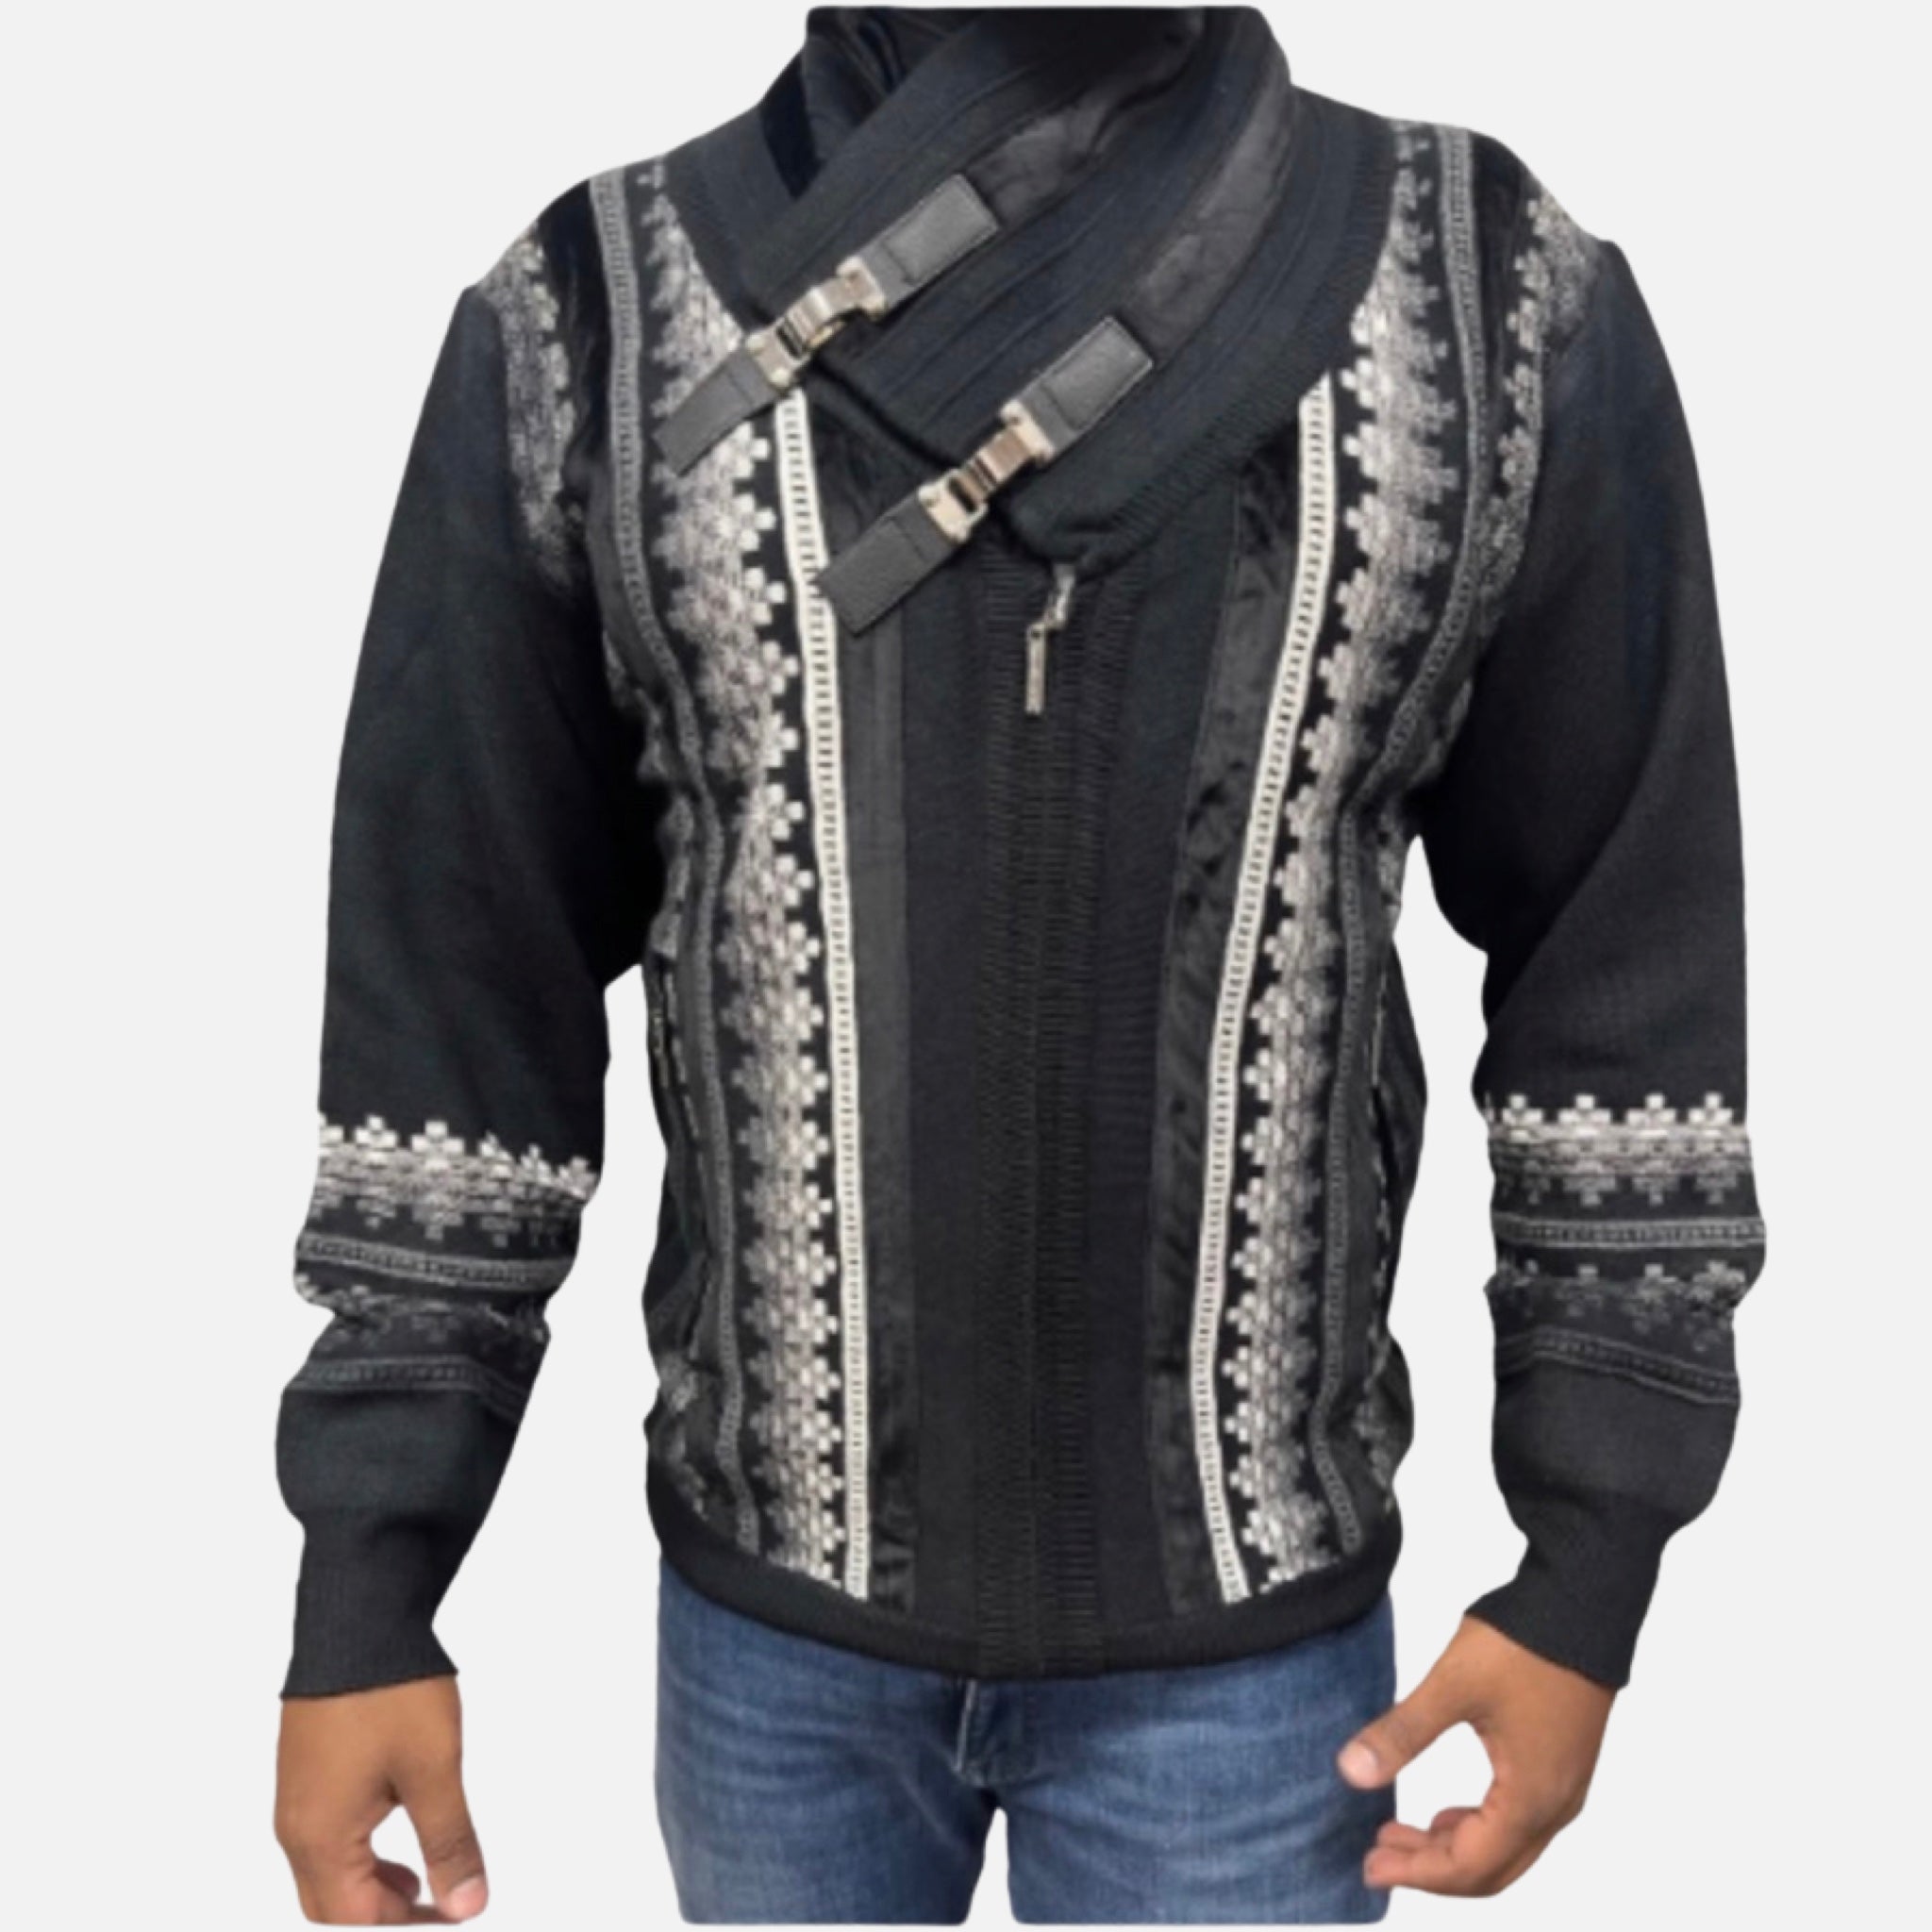 Mens black Double Buckle Strap Sweater